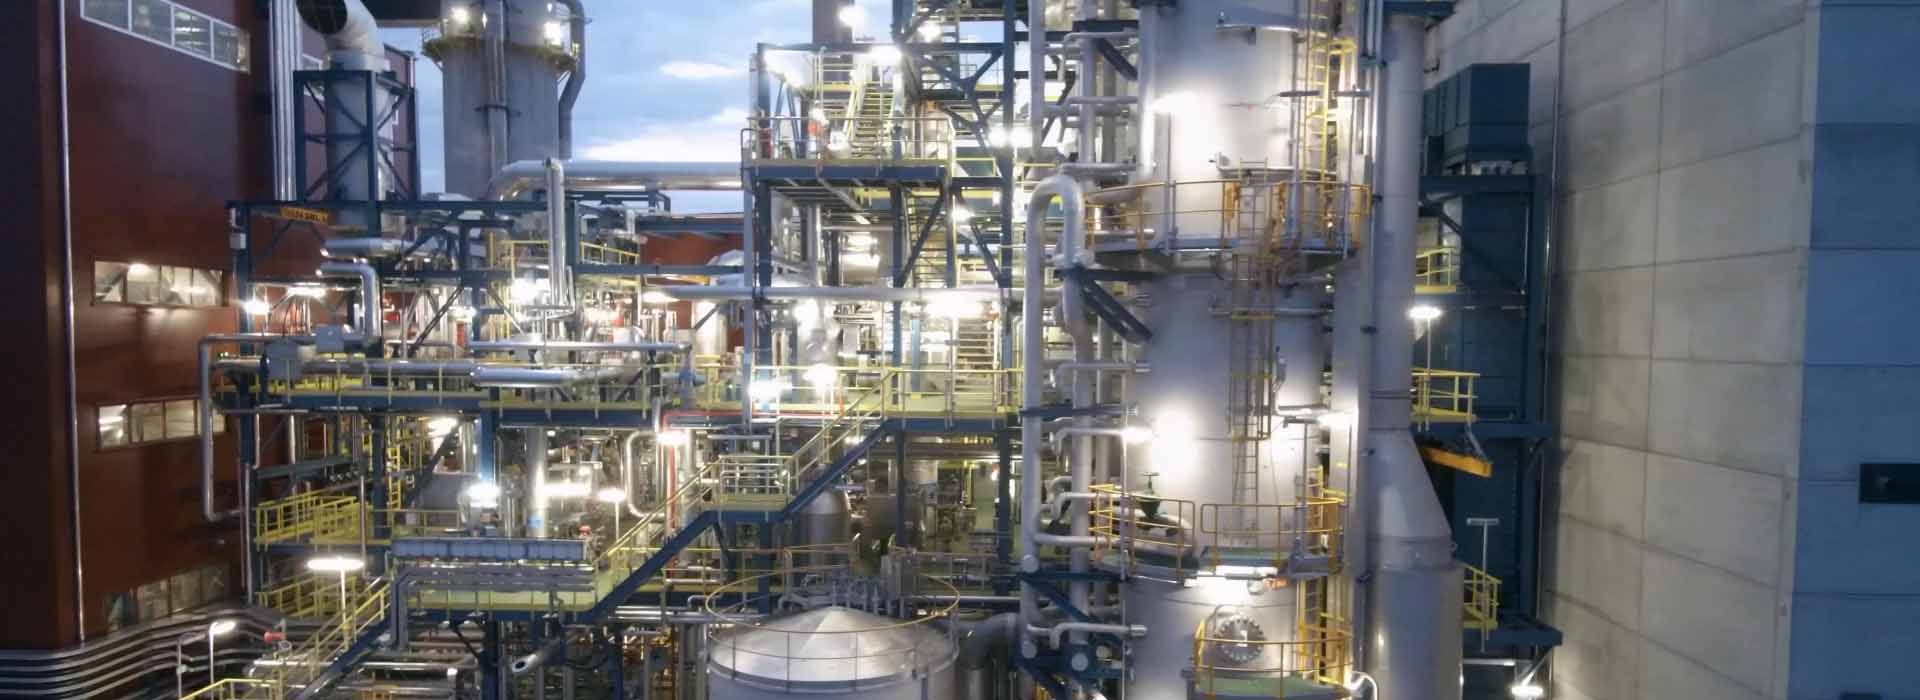 Nitric Acid Plant Drone Video of the Year